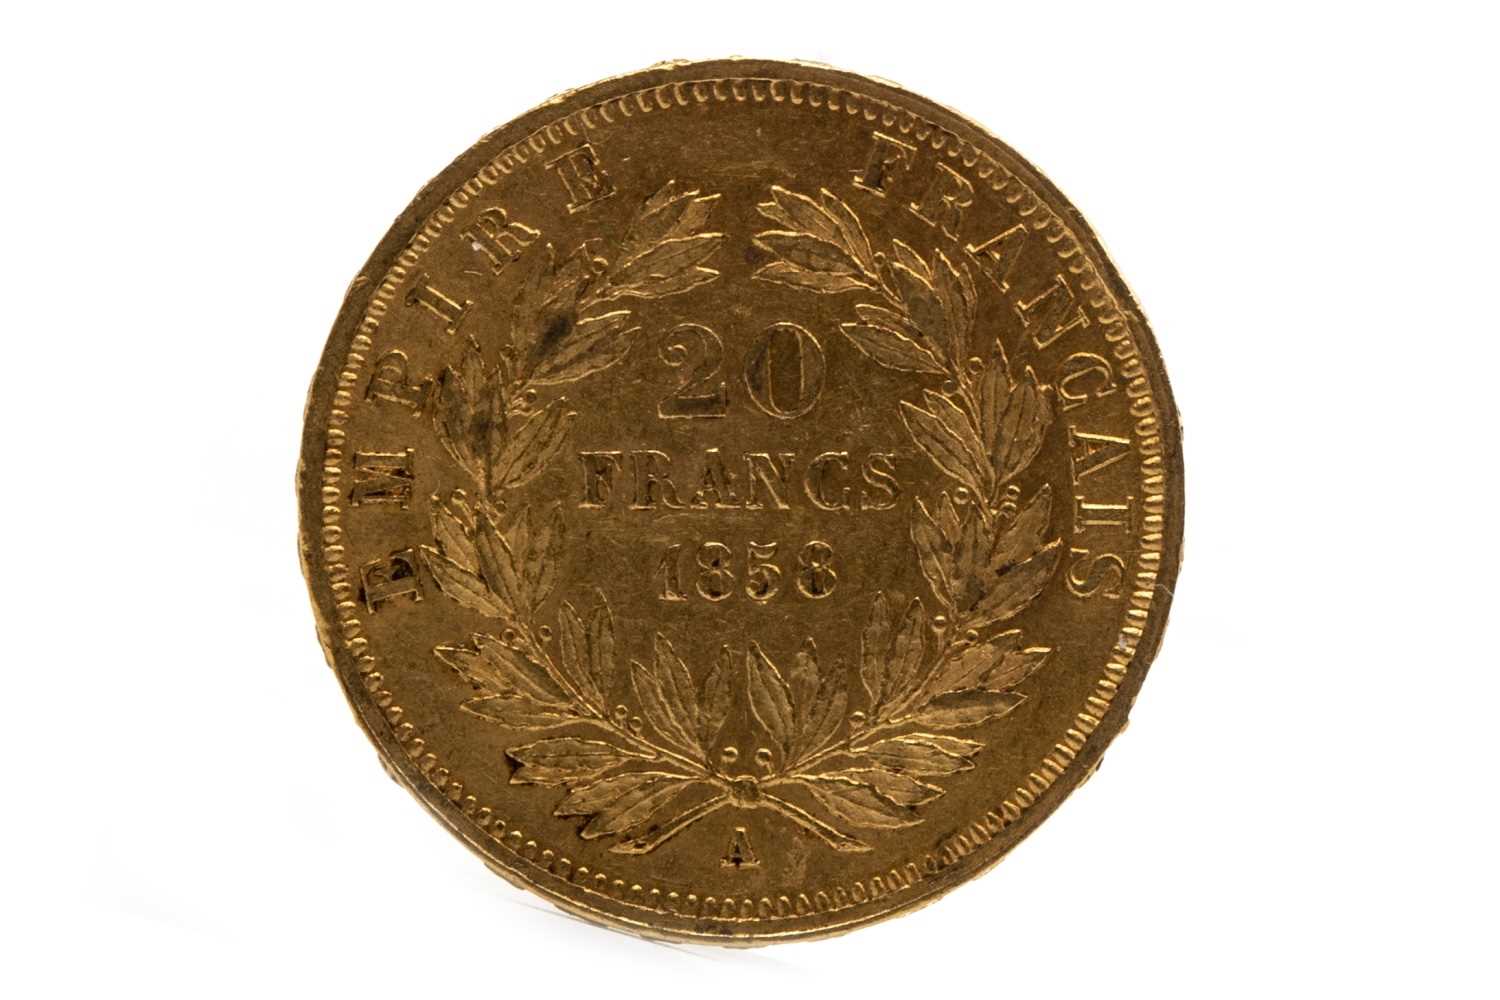 Lot 624 - A GOLD FRENCH 20 FRANC COIN, 1858